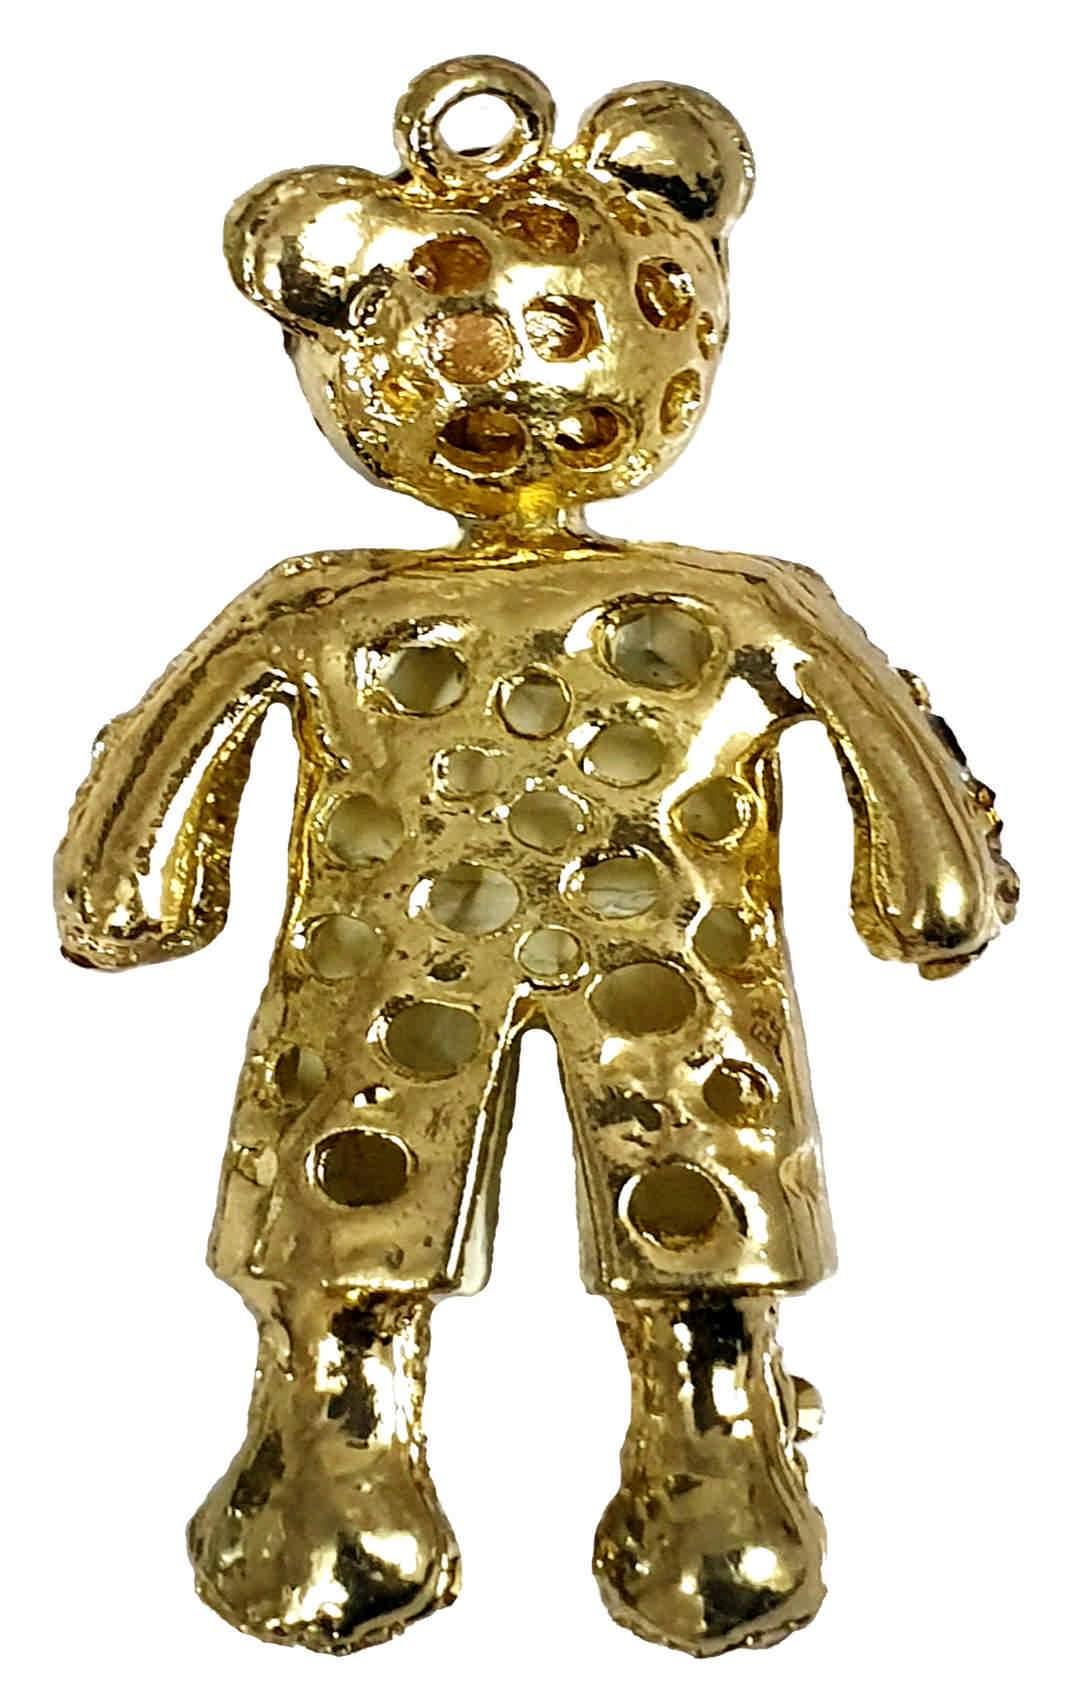 Rhinestone Studded Gold Metal Bear Design Fashion Artificial Imitation Pendant for Kids and Girls - #Indian Petals#